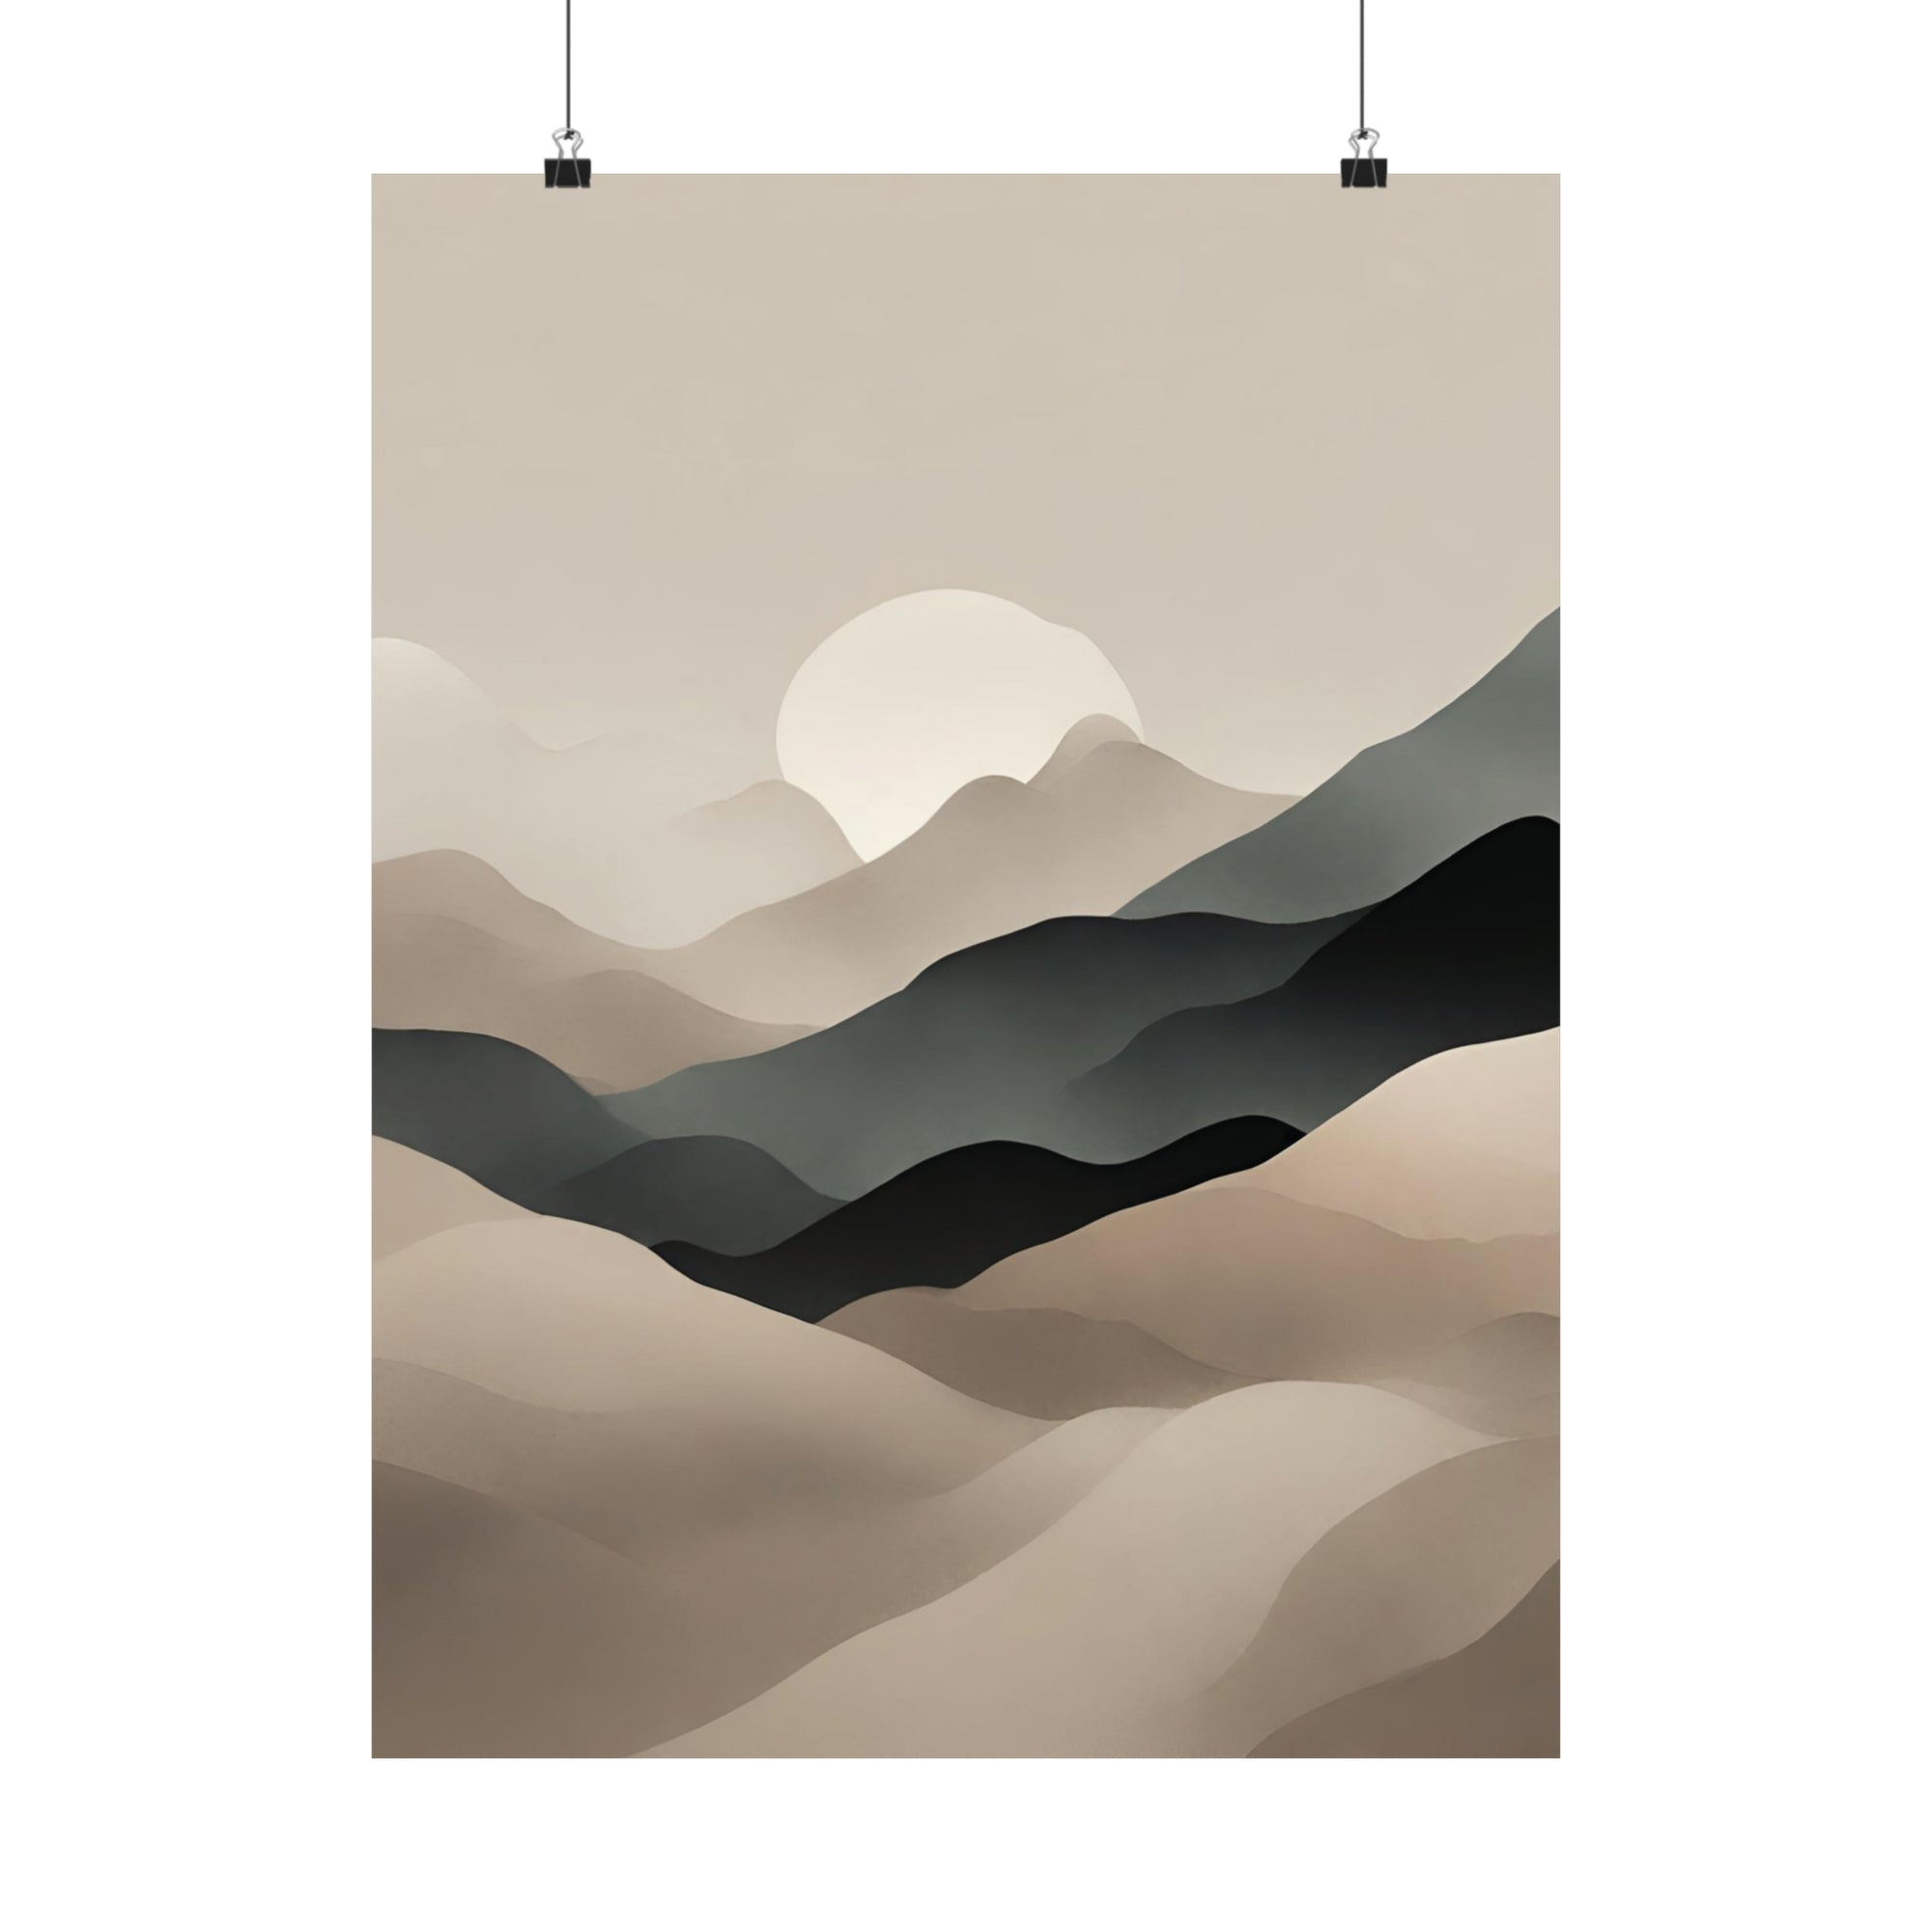 Moody Mysterious Series - Hills 3 - Matte Vertical Abstract Art Posters